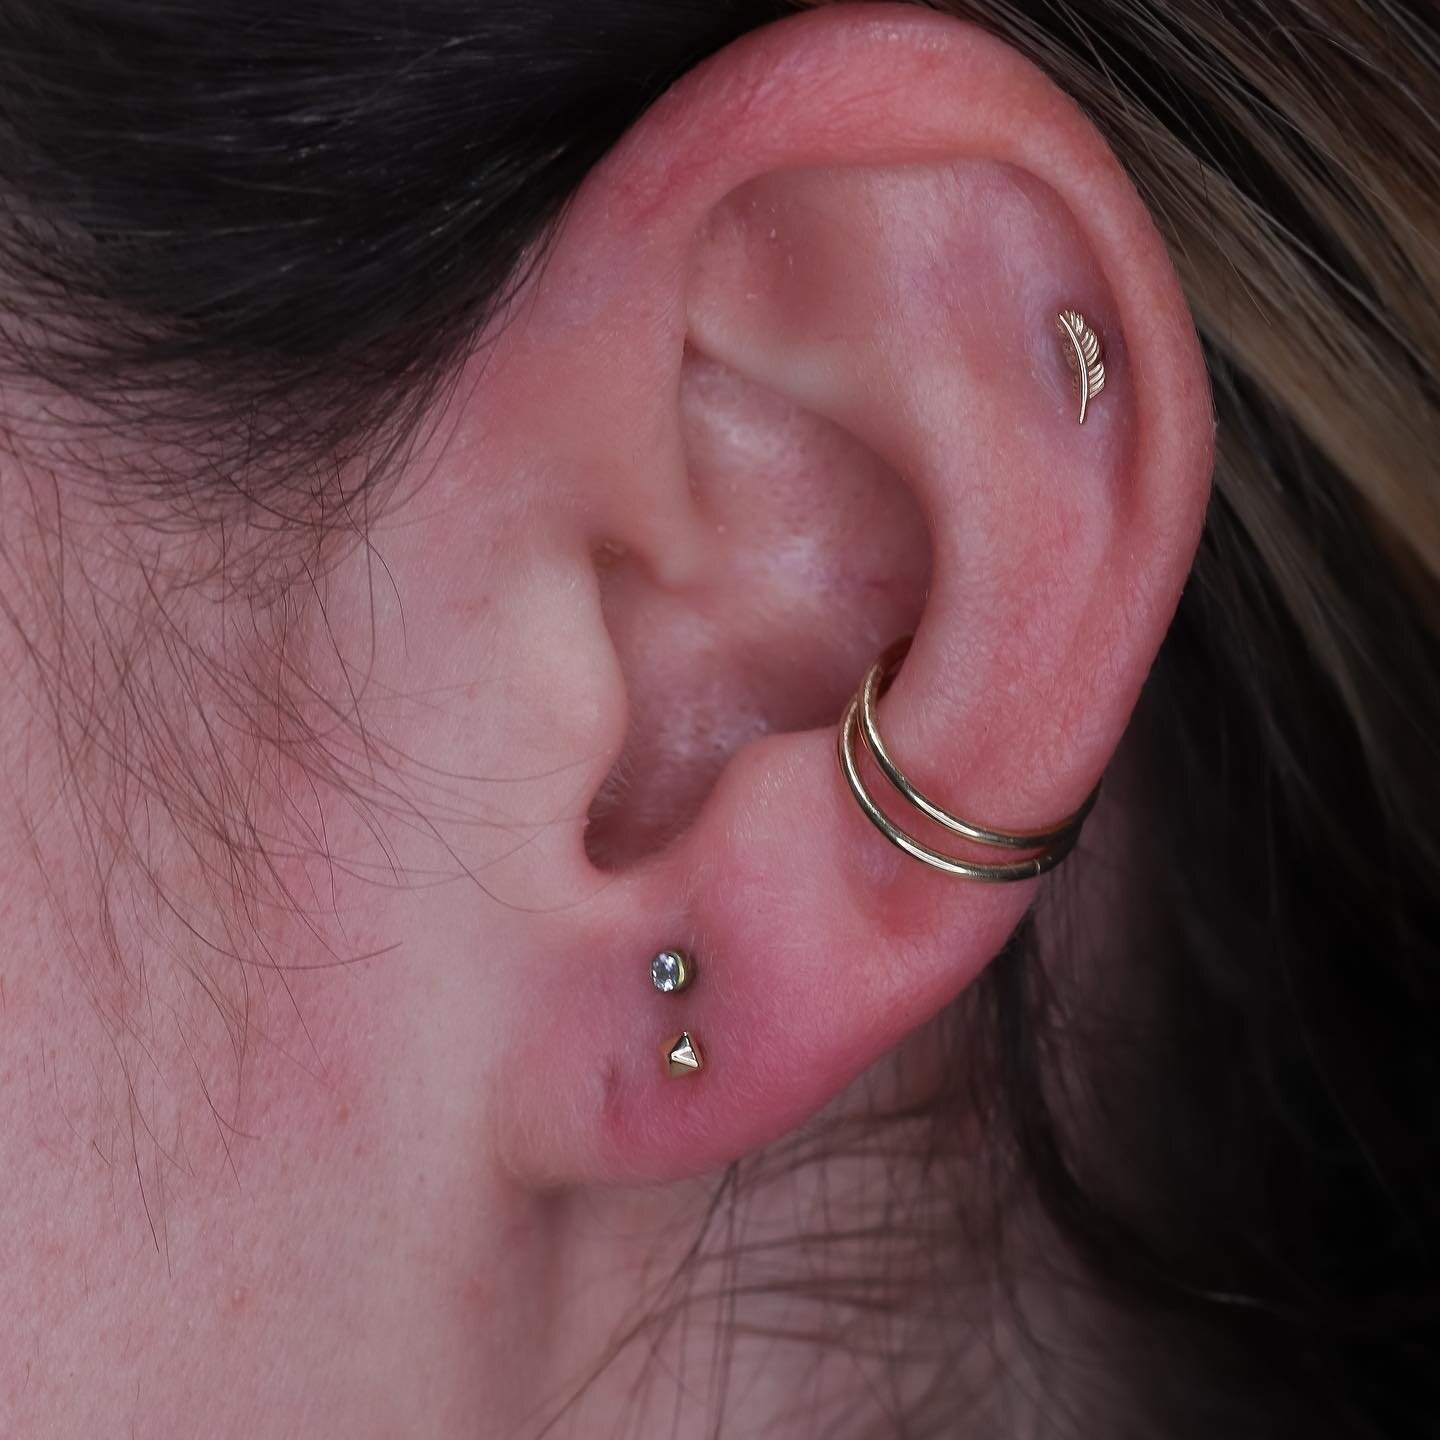 #Repost @raechelle.gabrielle​
---​
✨ S T A C K E D ✨​
Stacked lobes is always a fun way to add some dimension and a little bit of zest to your ear set up. The best way for us to check for anatomy with this piercing is to book an ear curation! We, nor